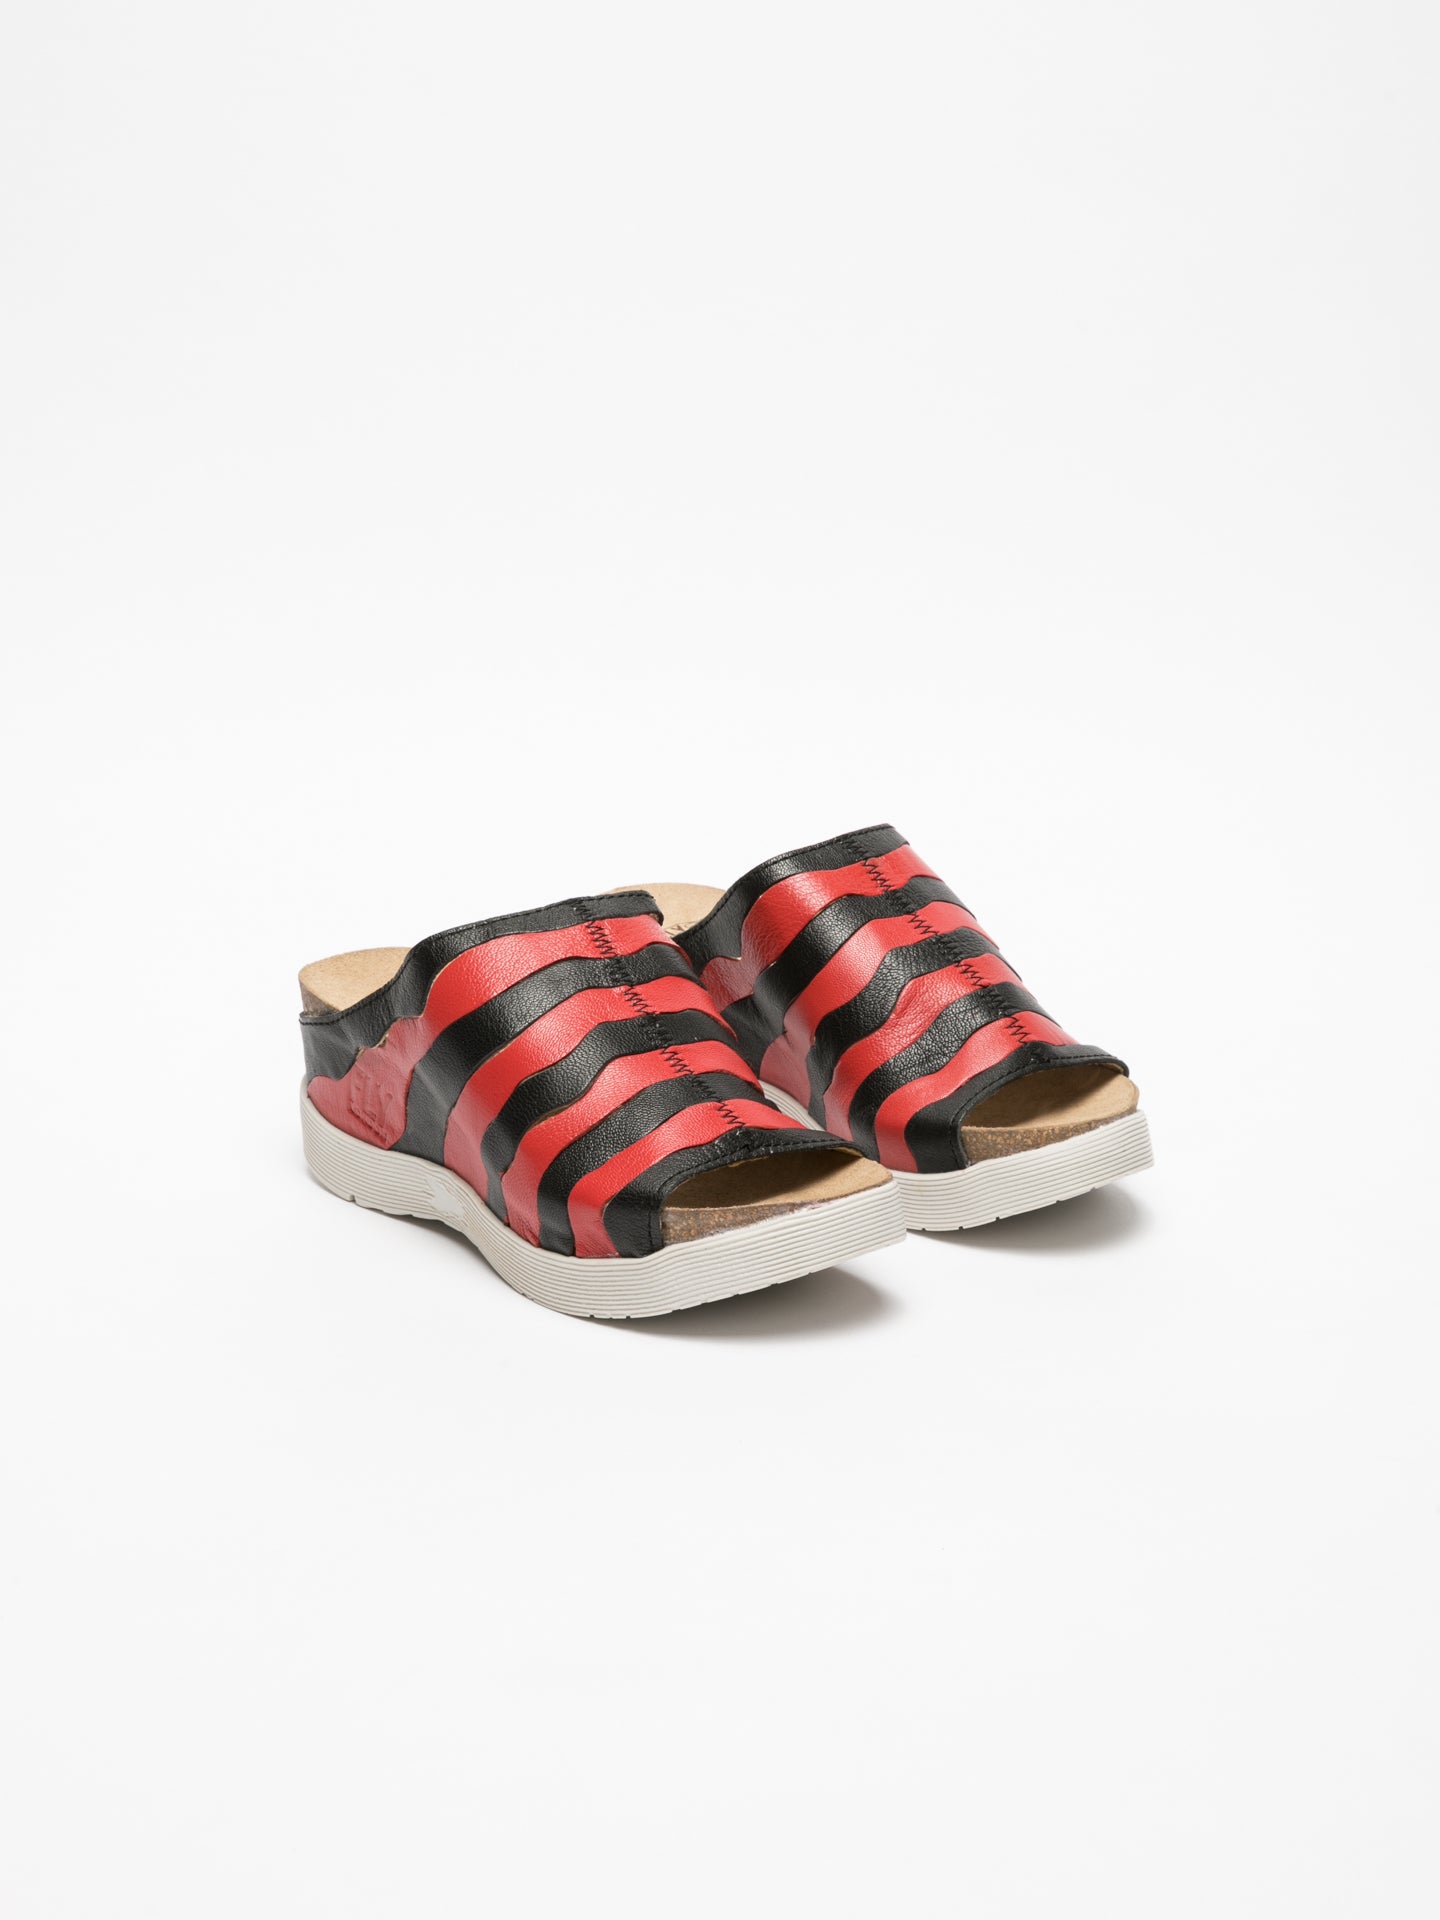 Fly London Red Black Open Toe Mules